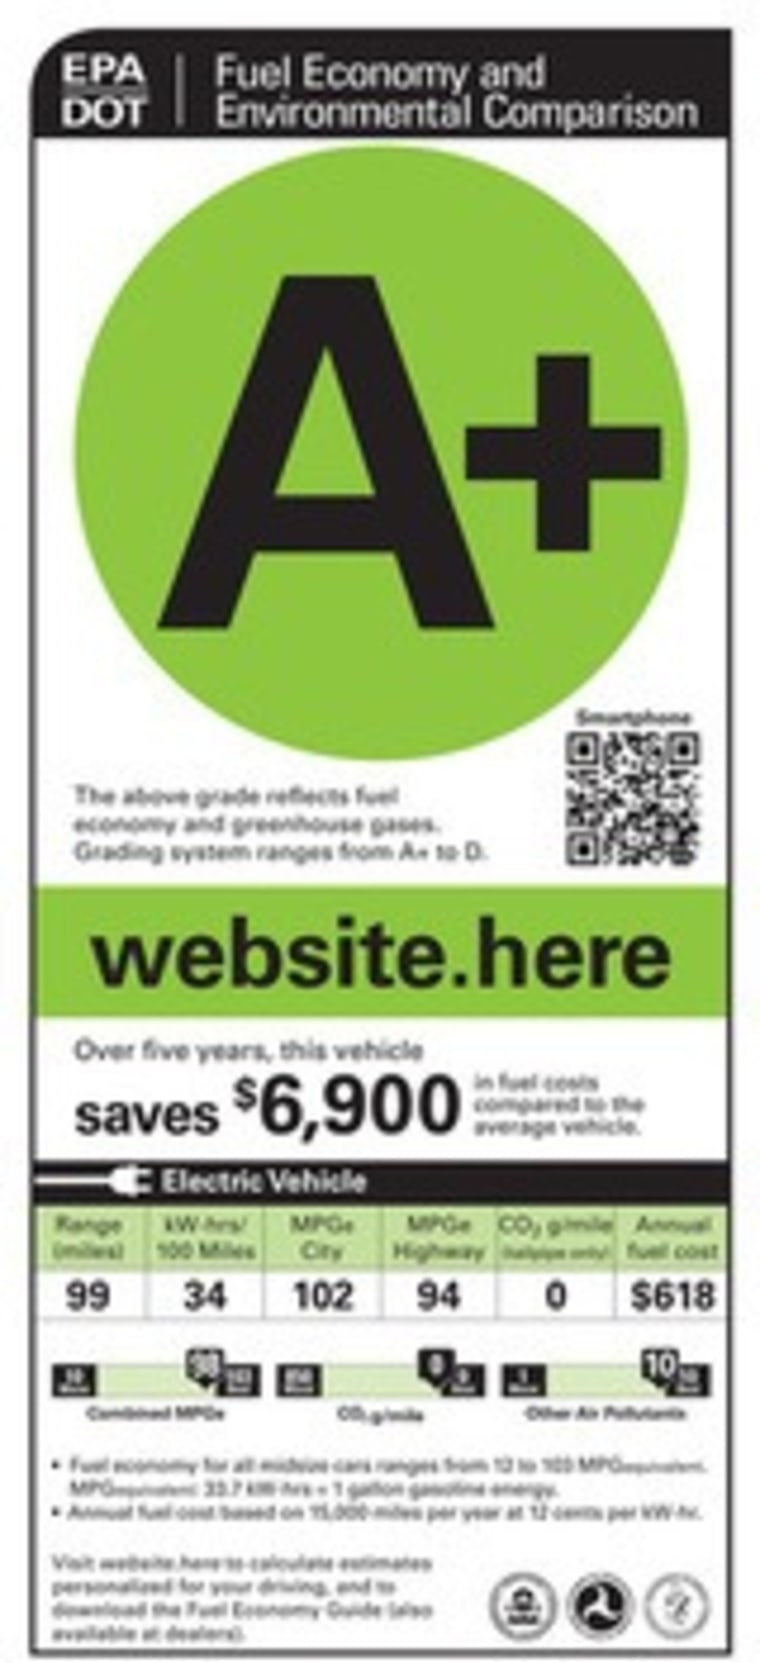 Image: 'Green' rating sticker